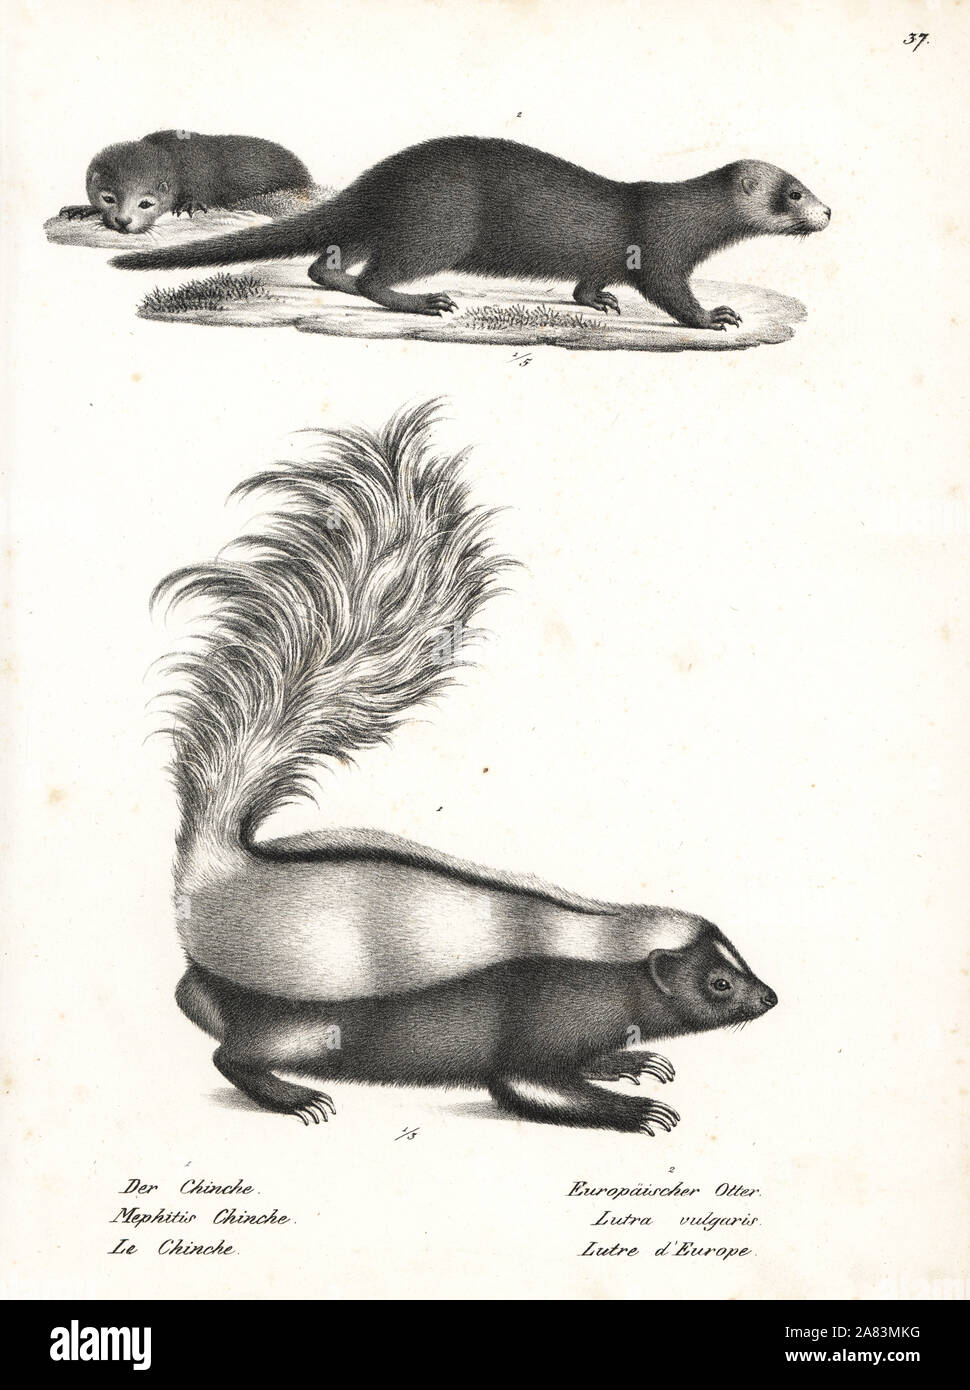 Striped skunk or chinche, Mephitis mephitis 1, and otter, Lutra lutra 2. Lithograph by Karl Joseph Brodtmann from Heinrich Rudolf Schinz's Illustrated Natural History of Men and Animals, 1836. Stock Photo